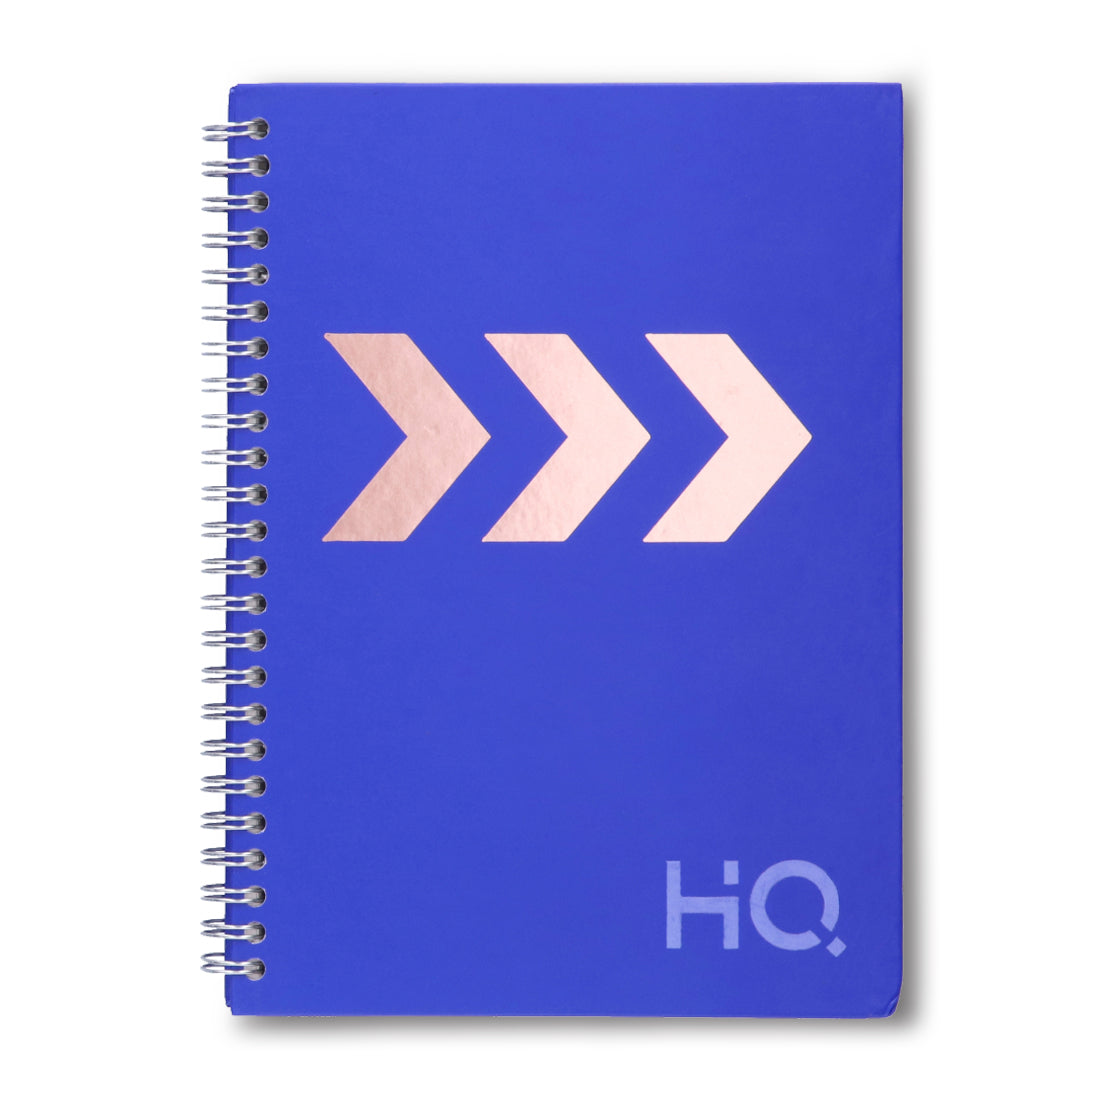 Navneet HQ | Hard Cover Notebook - Corporate Edge (Blue) for Office and Professional Use | Wiro Bound and Foil Stamping | Single Line | A5 Size - 21 cm x 14.8 cm | 192 Pages